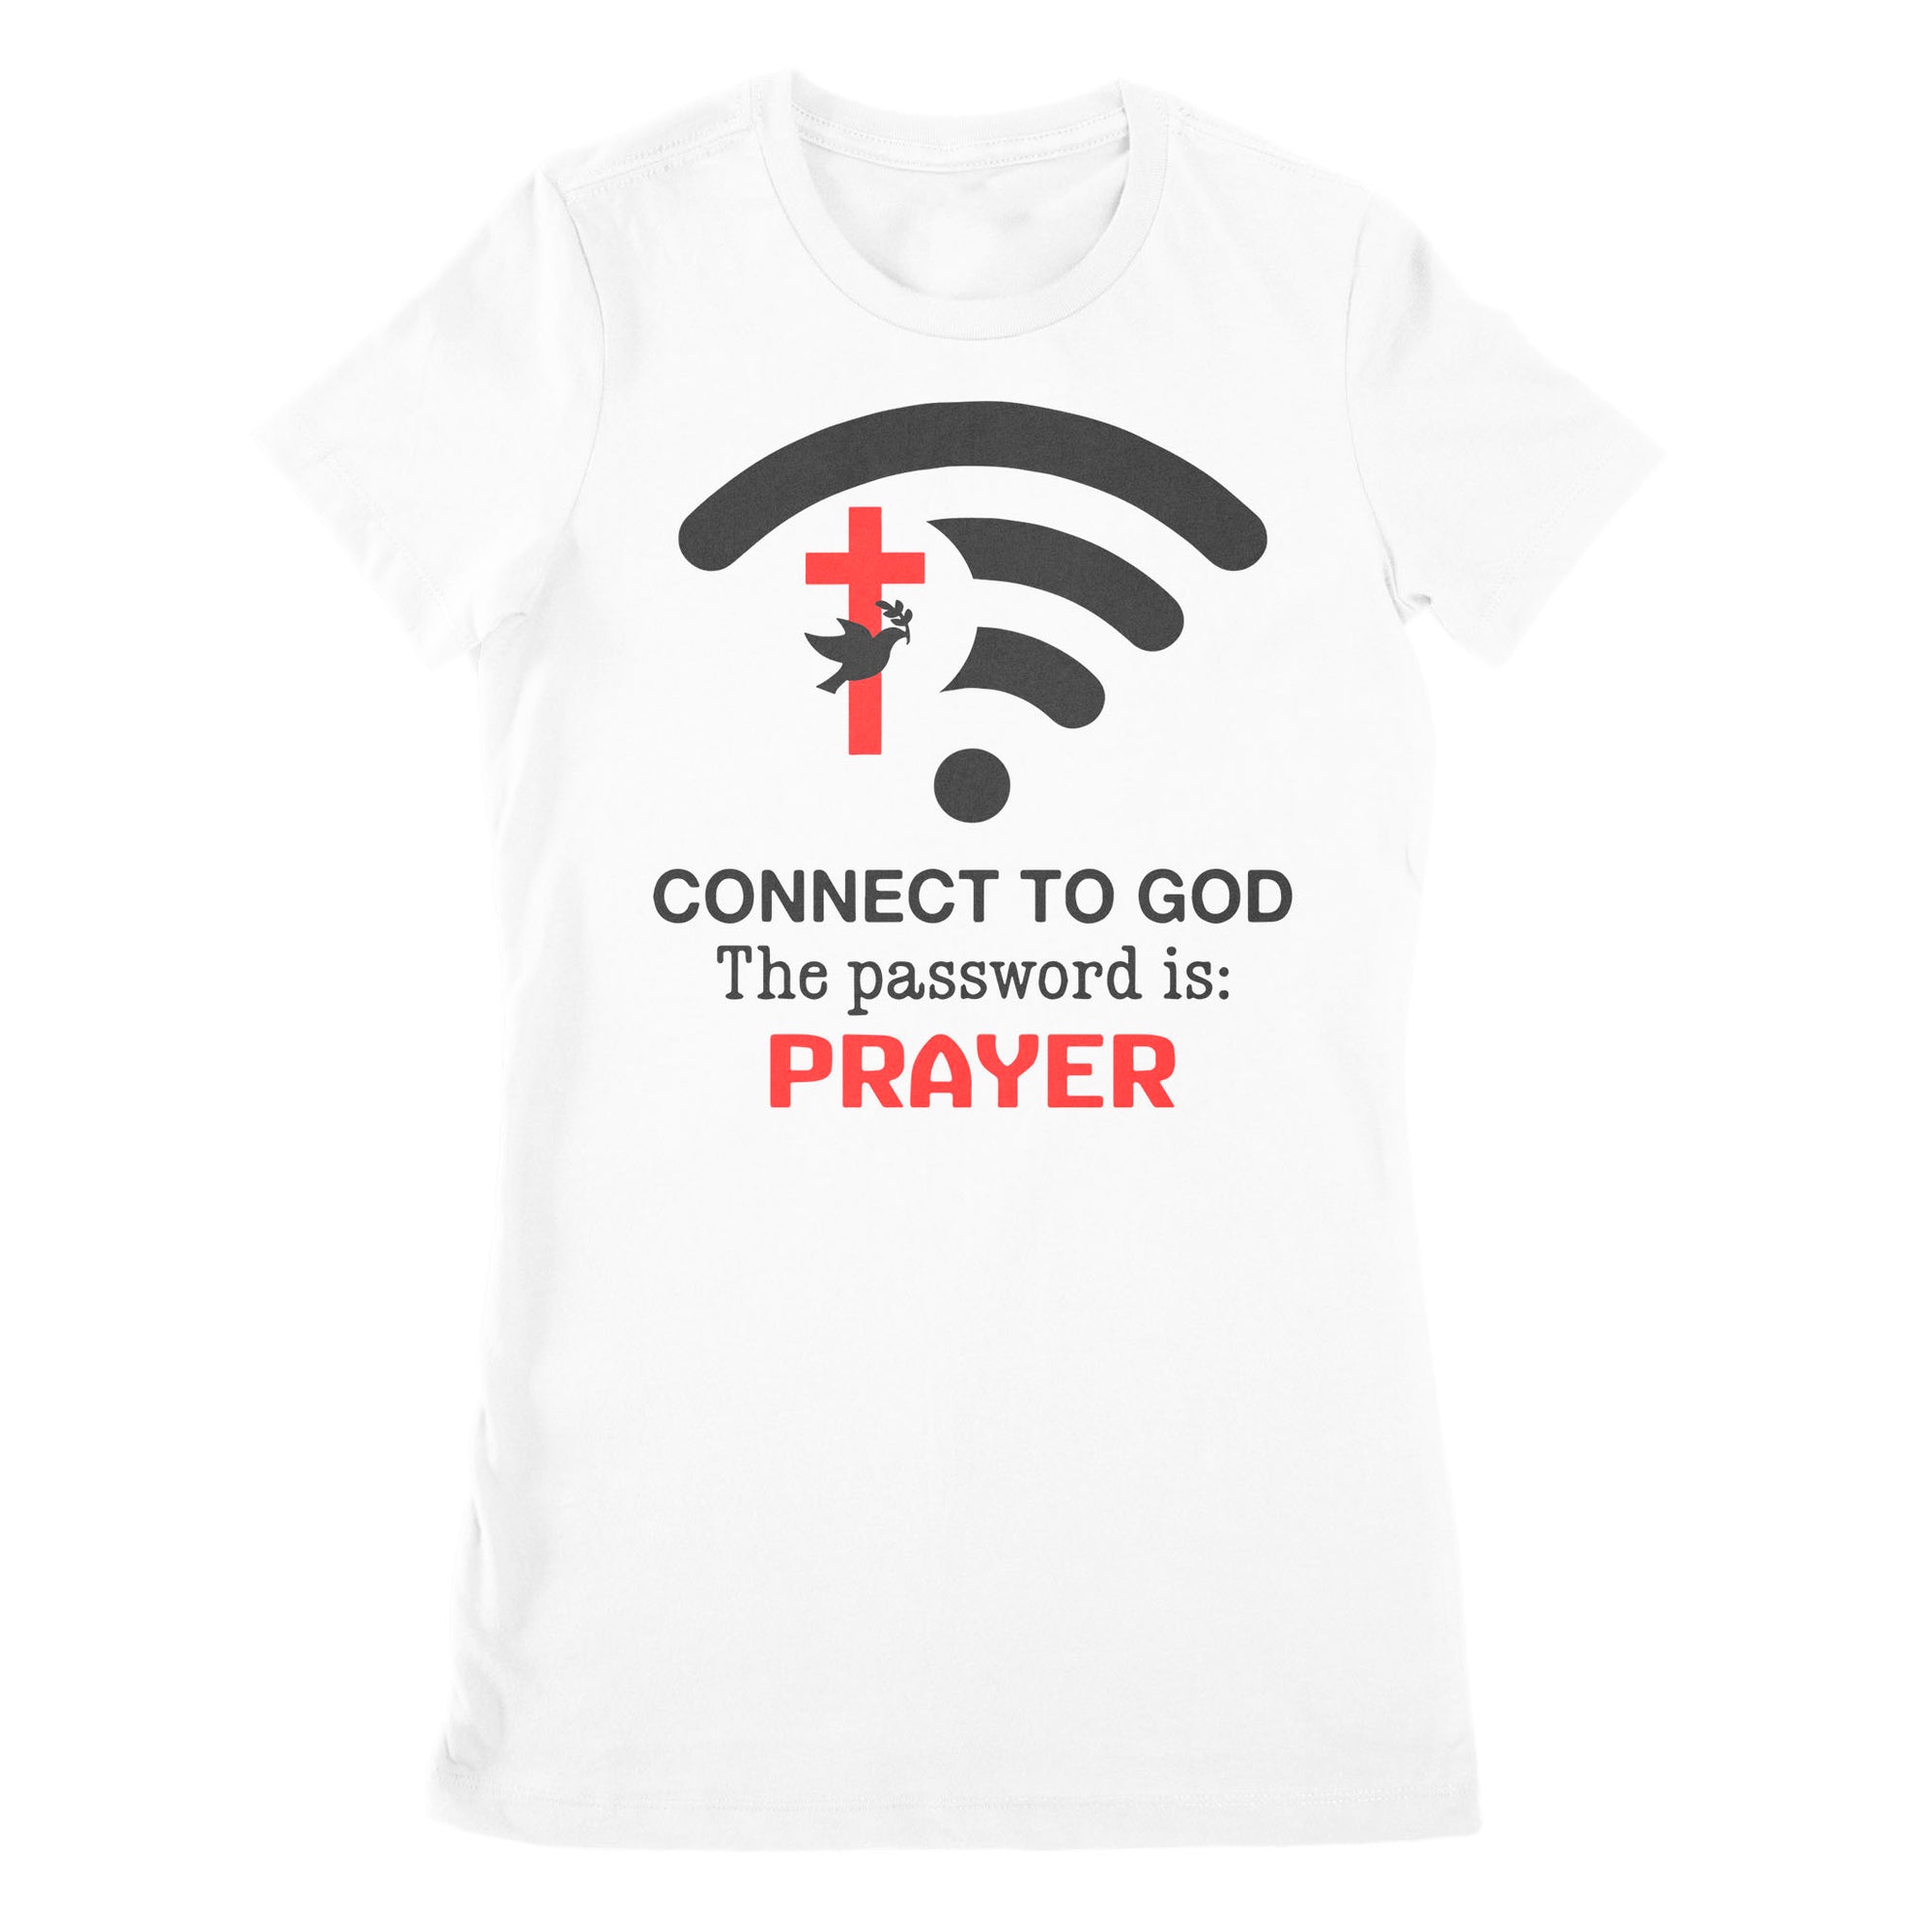 Connect to God the password is Prayer - Premium Women's T-shirt